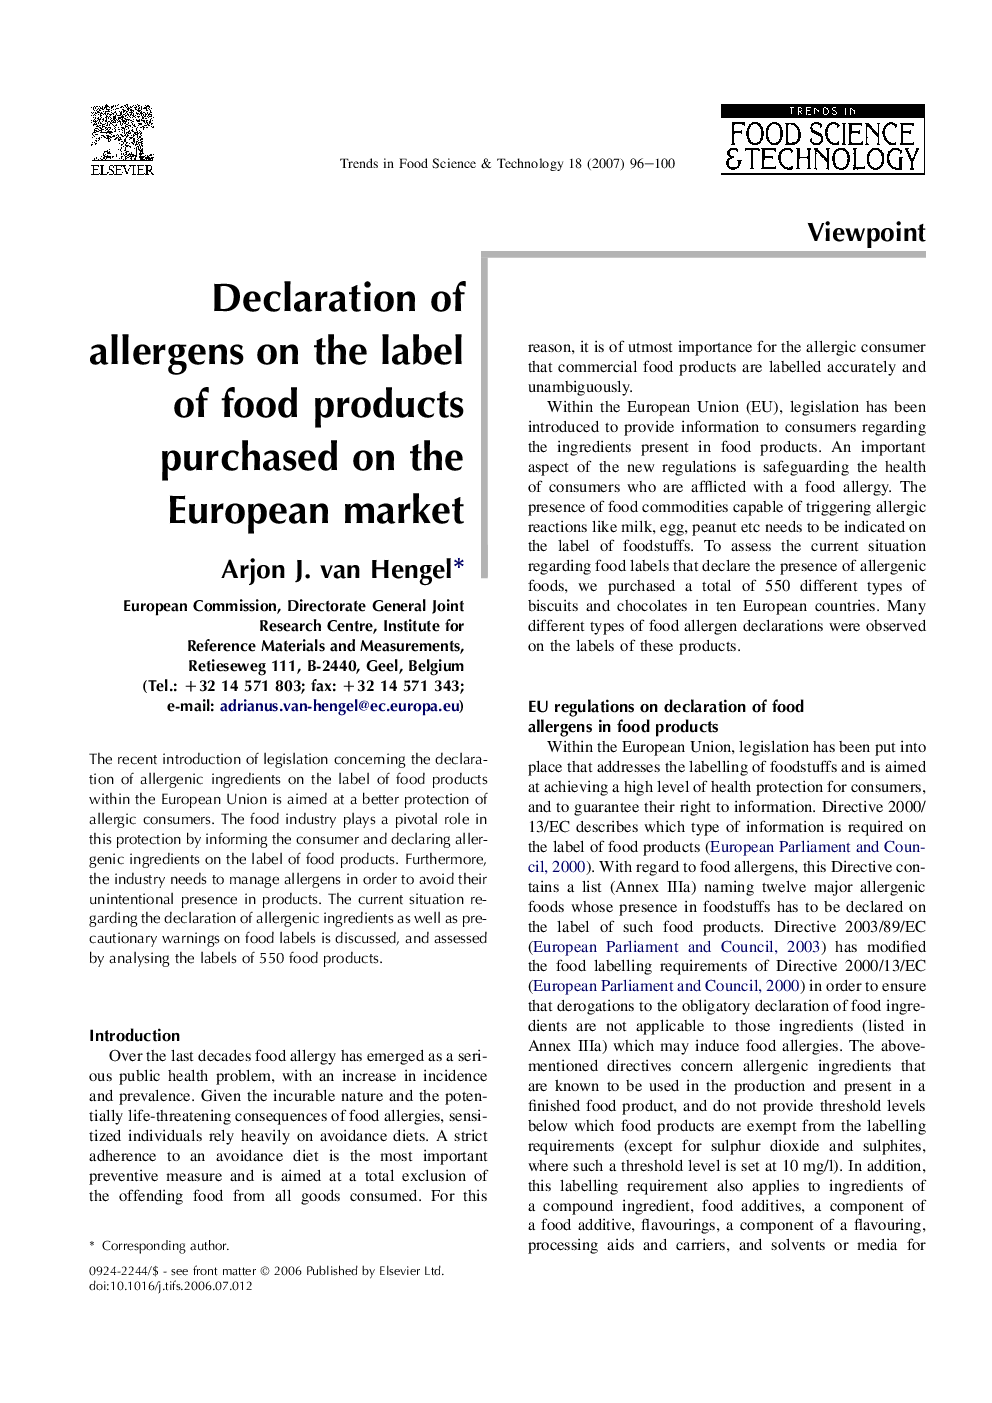 Declaration of allergens on the label of food products purchased on the European market